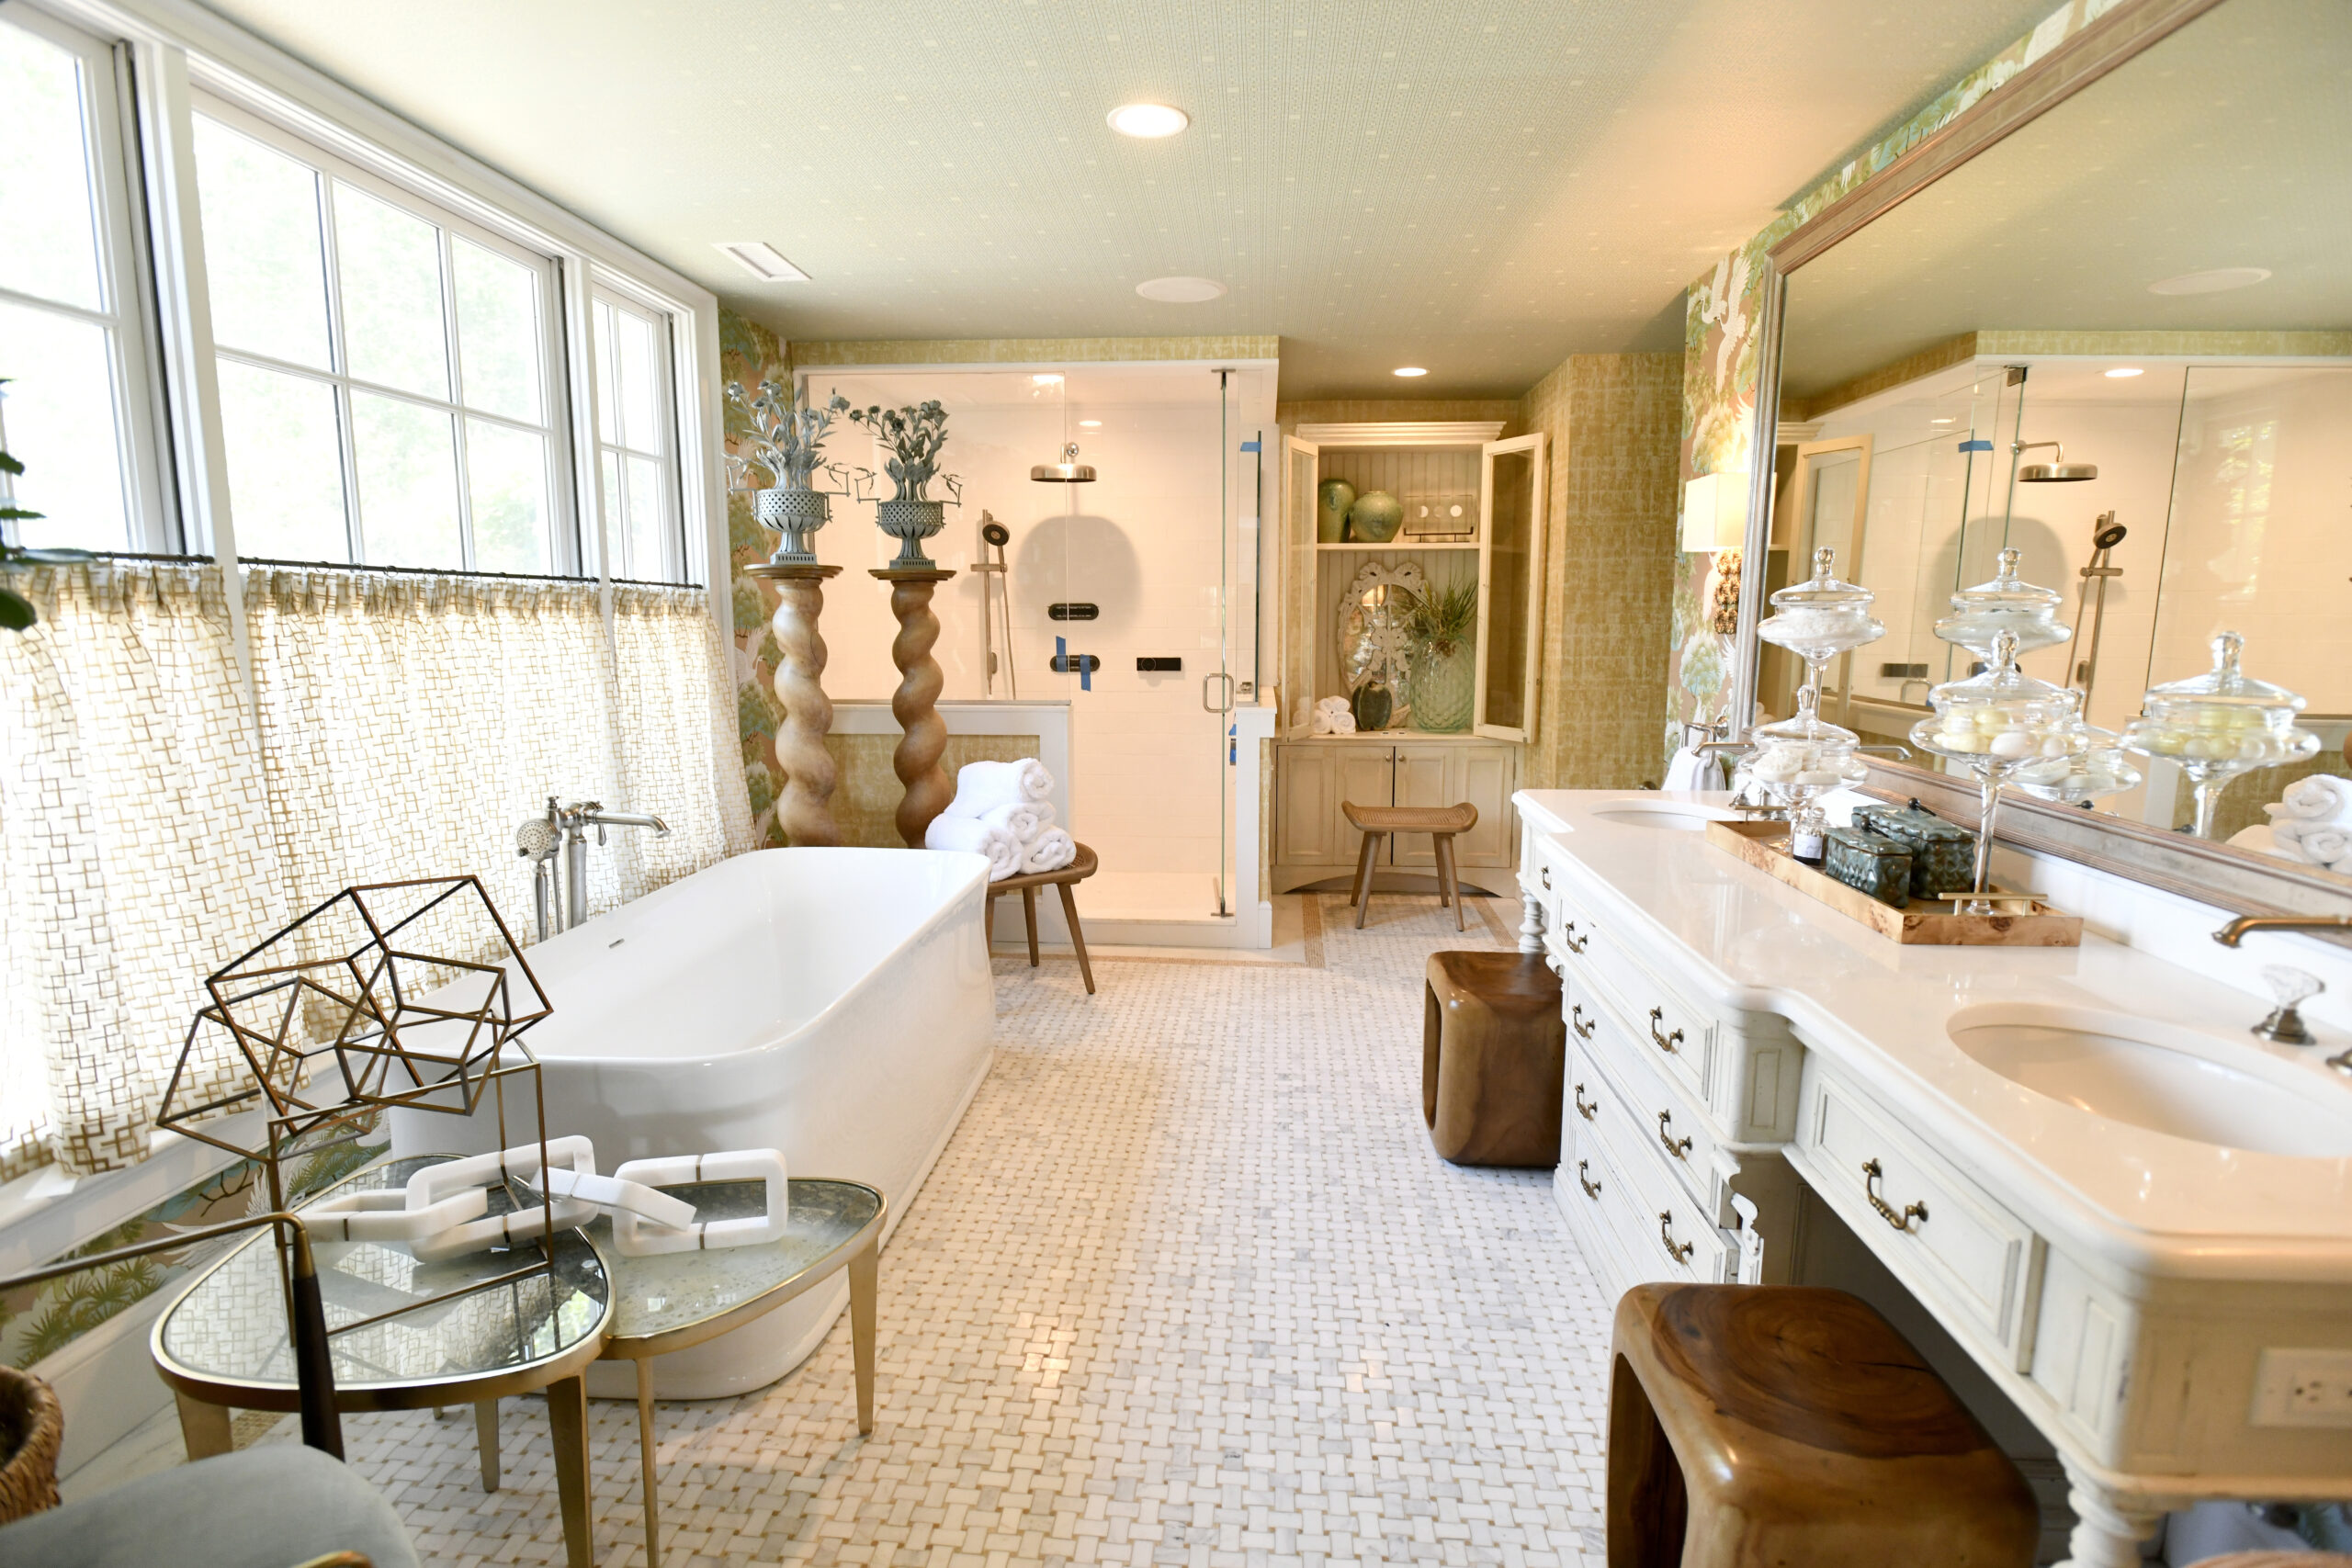 Keith Baltimore’s primary bath at the Hampton Designer Showhouse features an antique chest that was incorporated into a large double vanity. All fixtures and fittings are by Kohler.  DANA SHAW